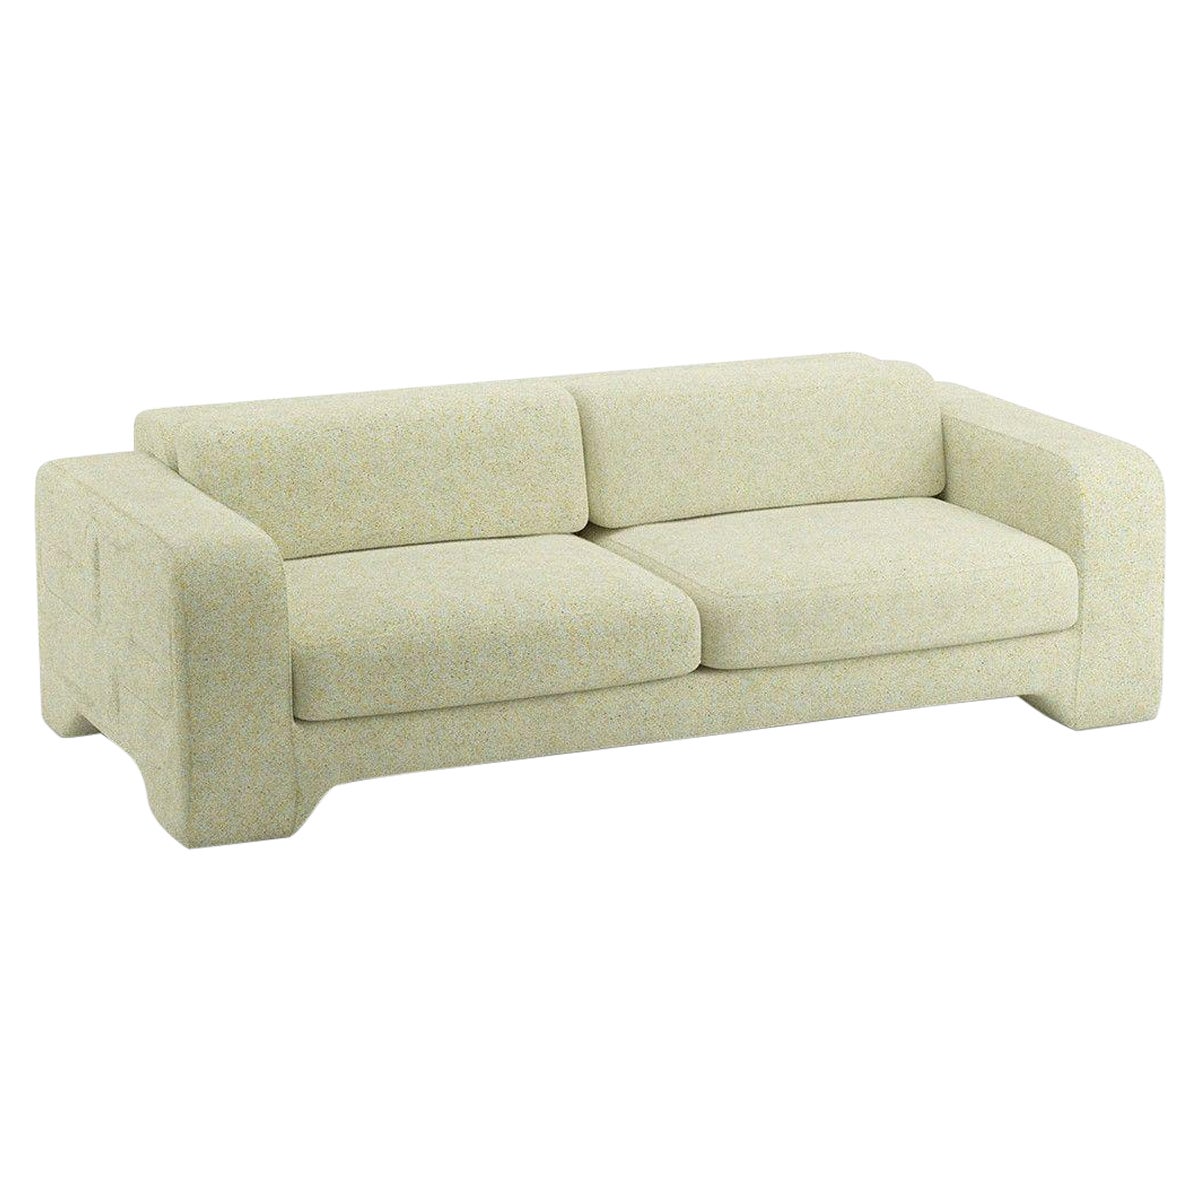 Popus Editions Giovanna 3 Seater Sofa in Sage Zanzi Linen & Wool Blend Fabric For Sale